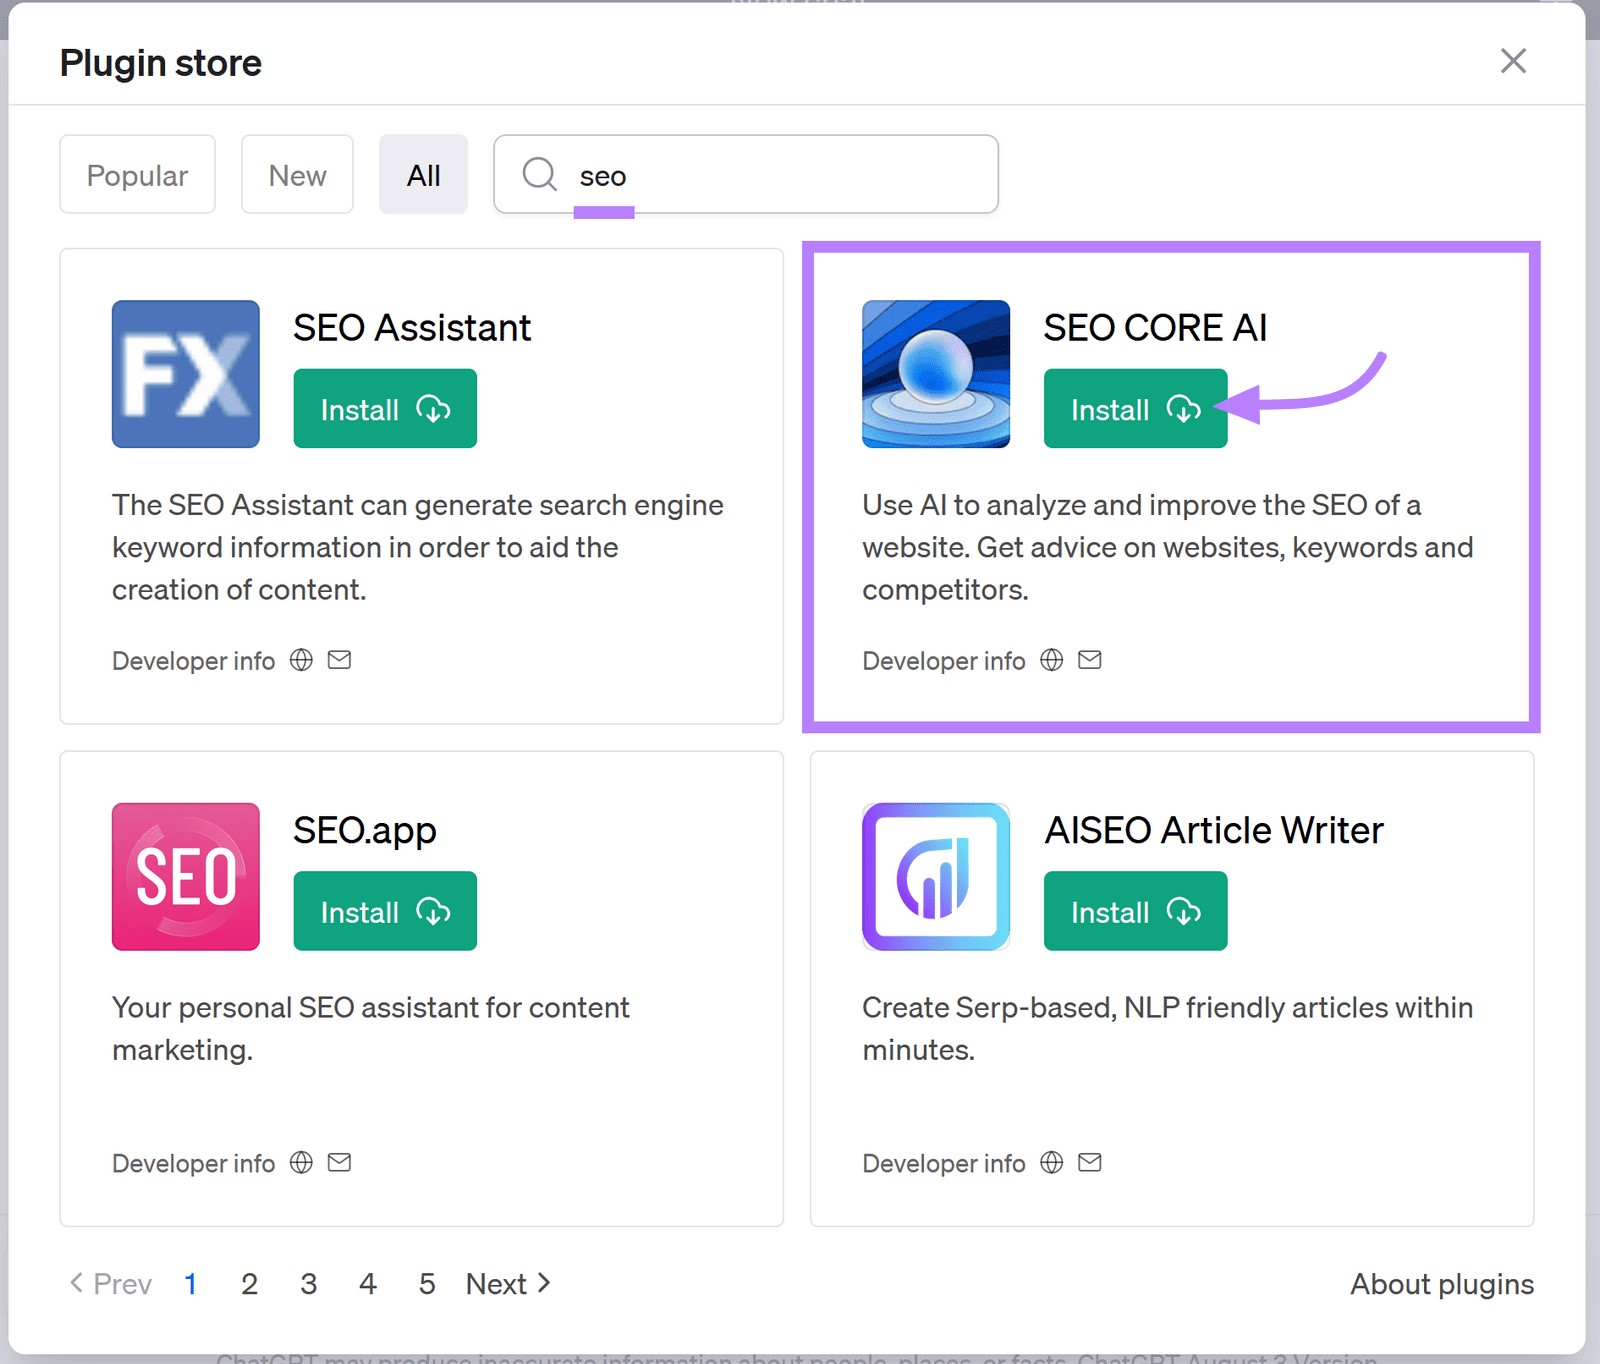 "Plugin store" page with SEO Core AI tool highlighted